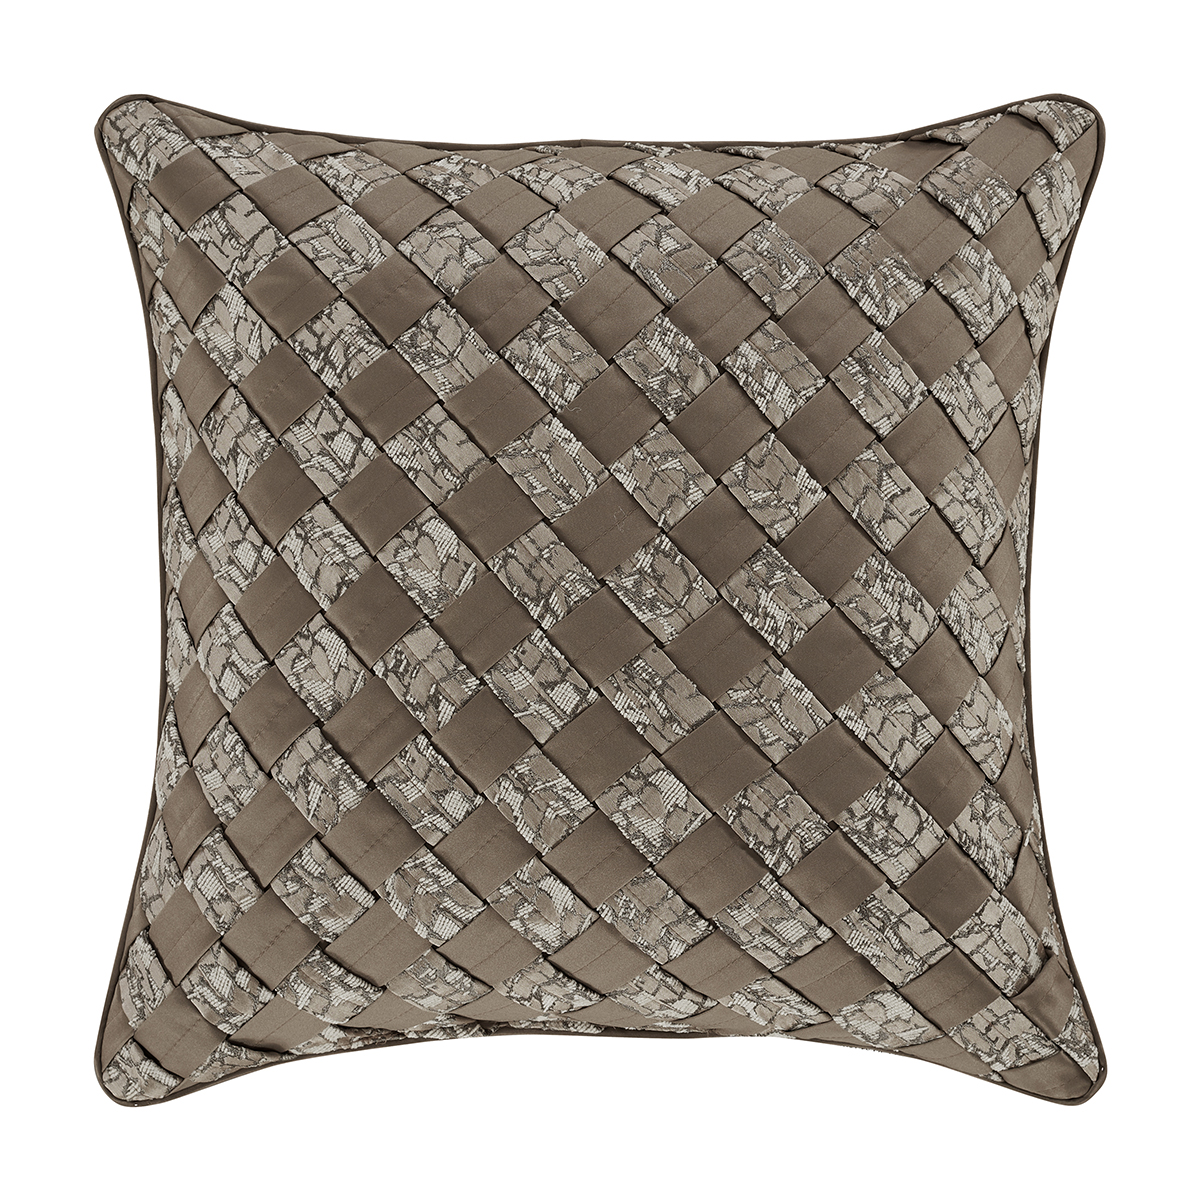 J. Queen New York Cracked Ice Square Decorative Pillow  - 18x18